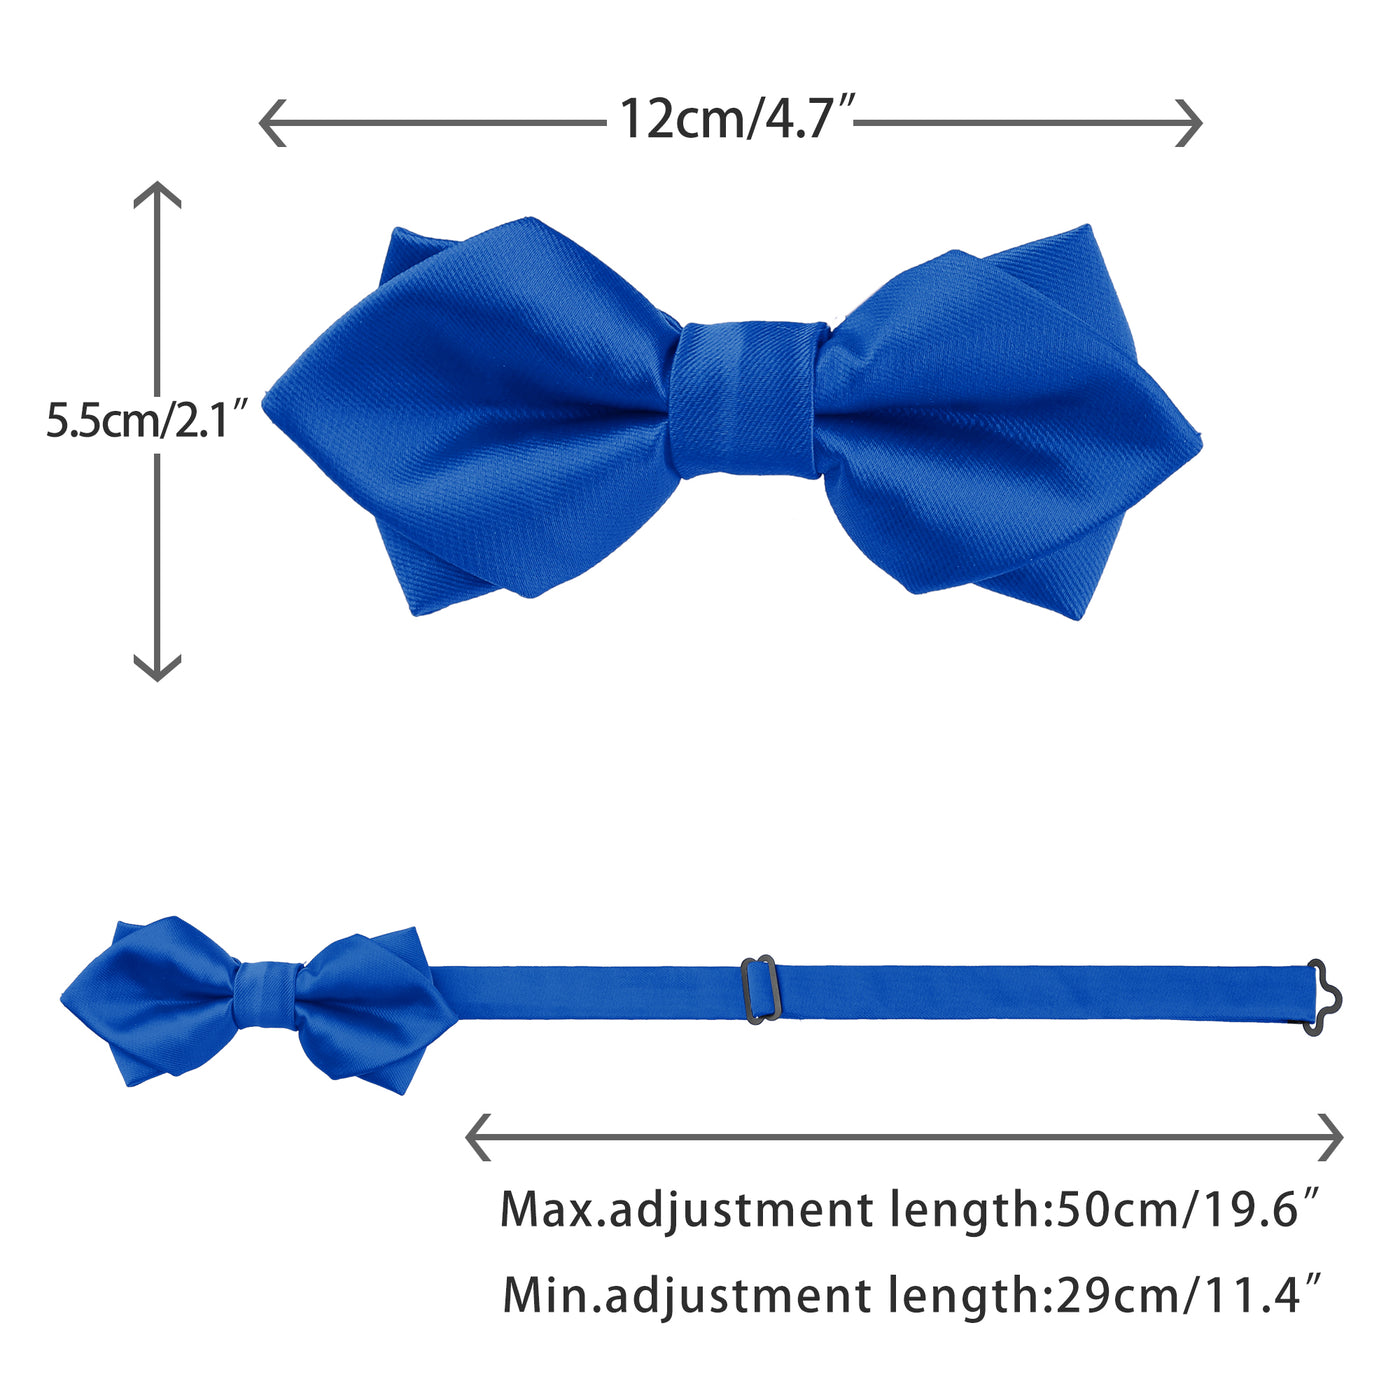 Bublédon Men's Pre-tied Bow Ties Diamond Pointed Solid Bowties for Formal Wedding